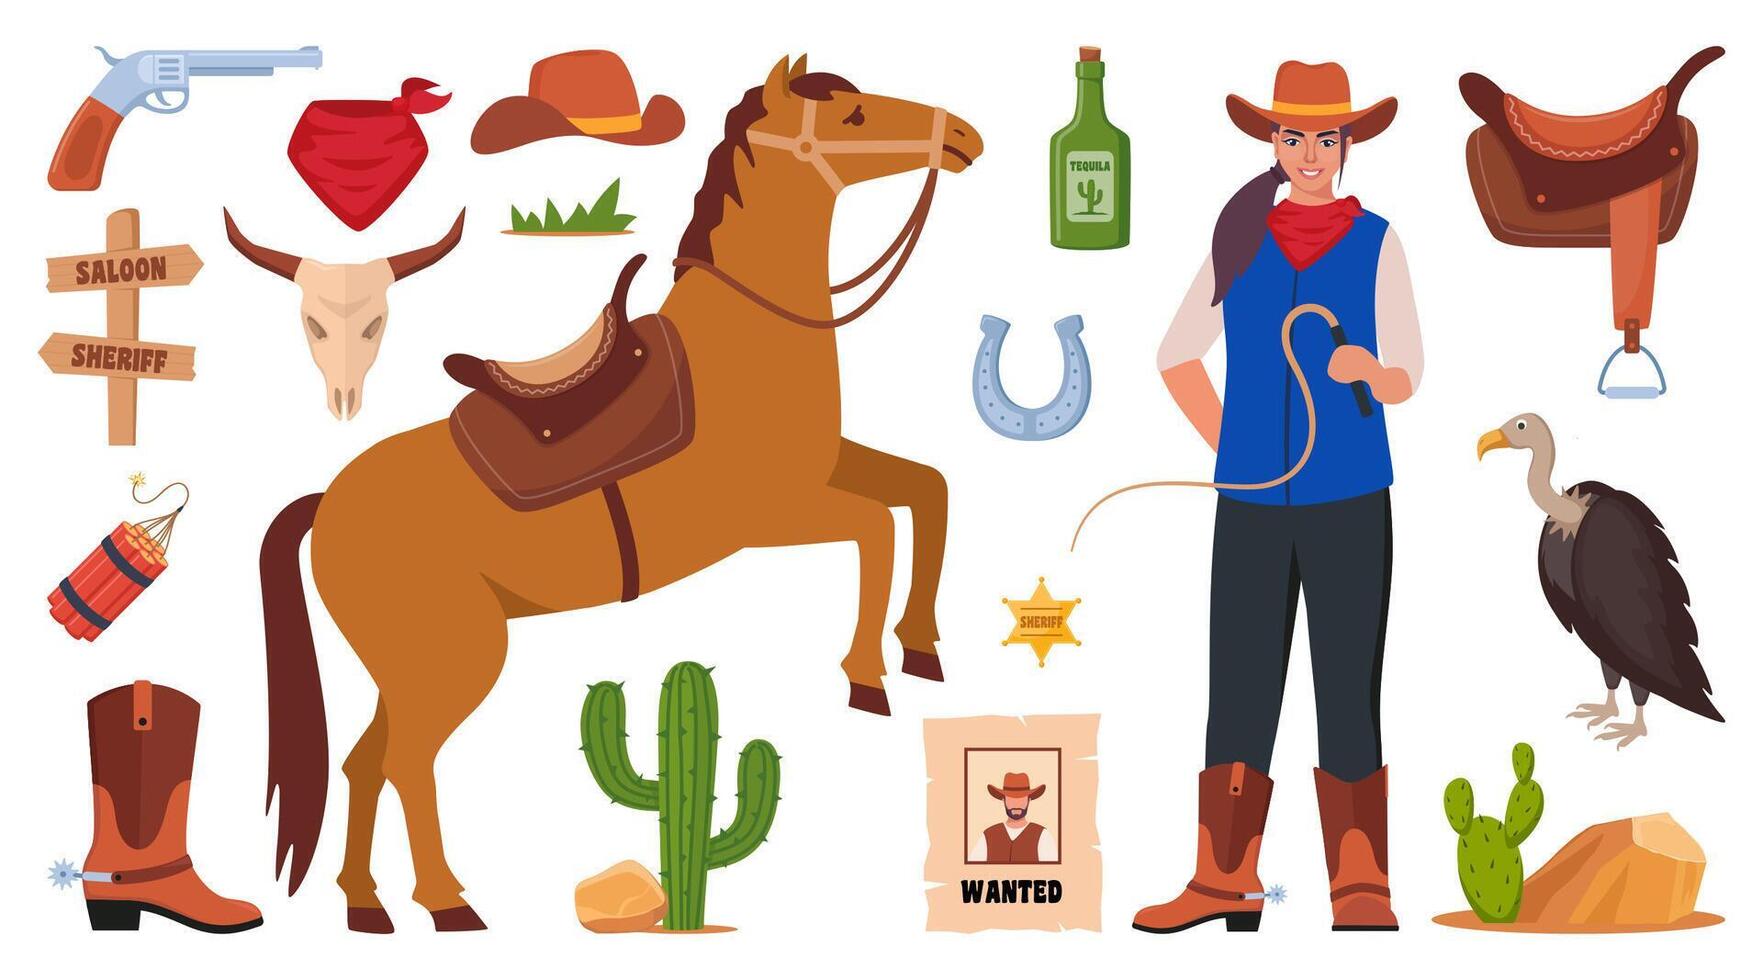 Wild West icons, set. Western and cowboy elements. Signboard, saloon door, wanted poster, sheriff badge, cactus, cow skull, cowboy hat, revolver, wagon. Texas symbols. vector